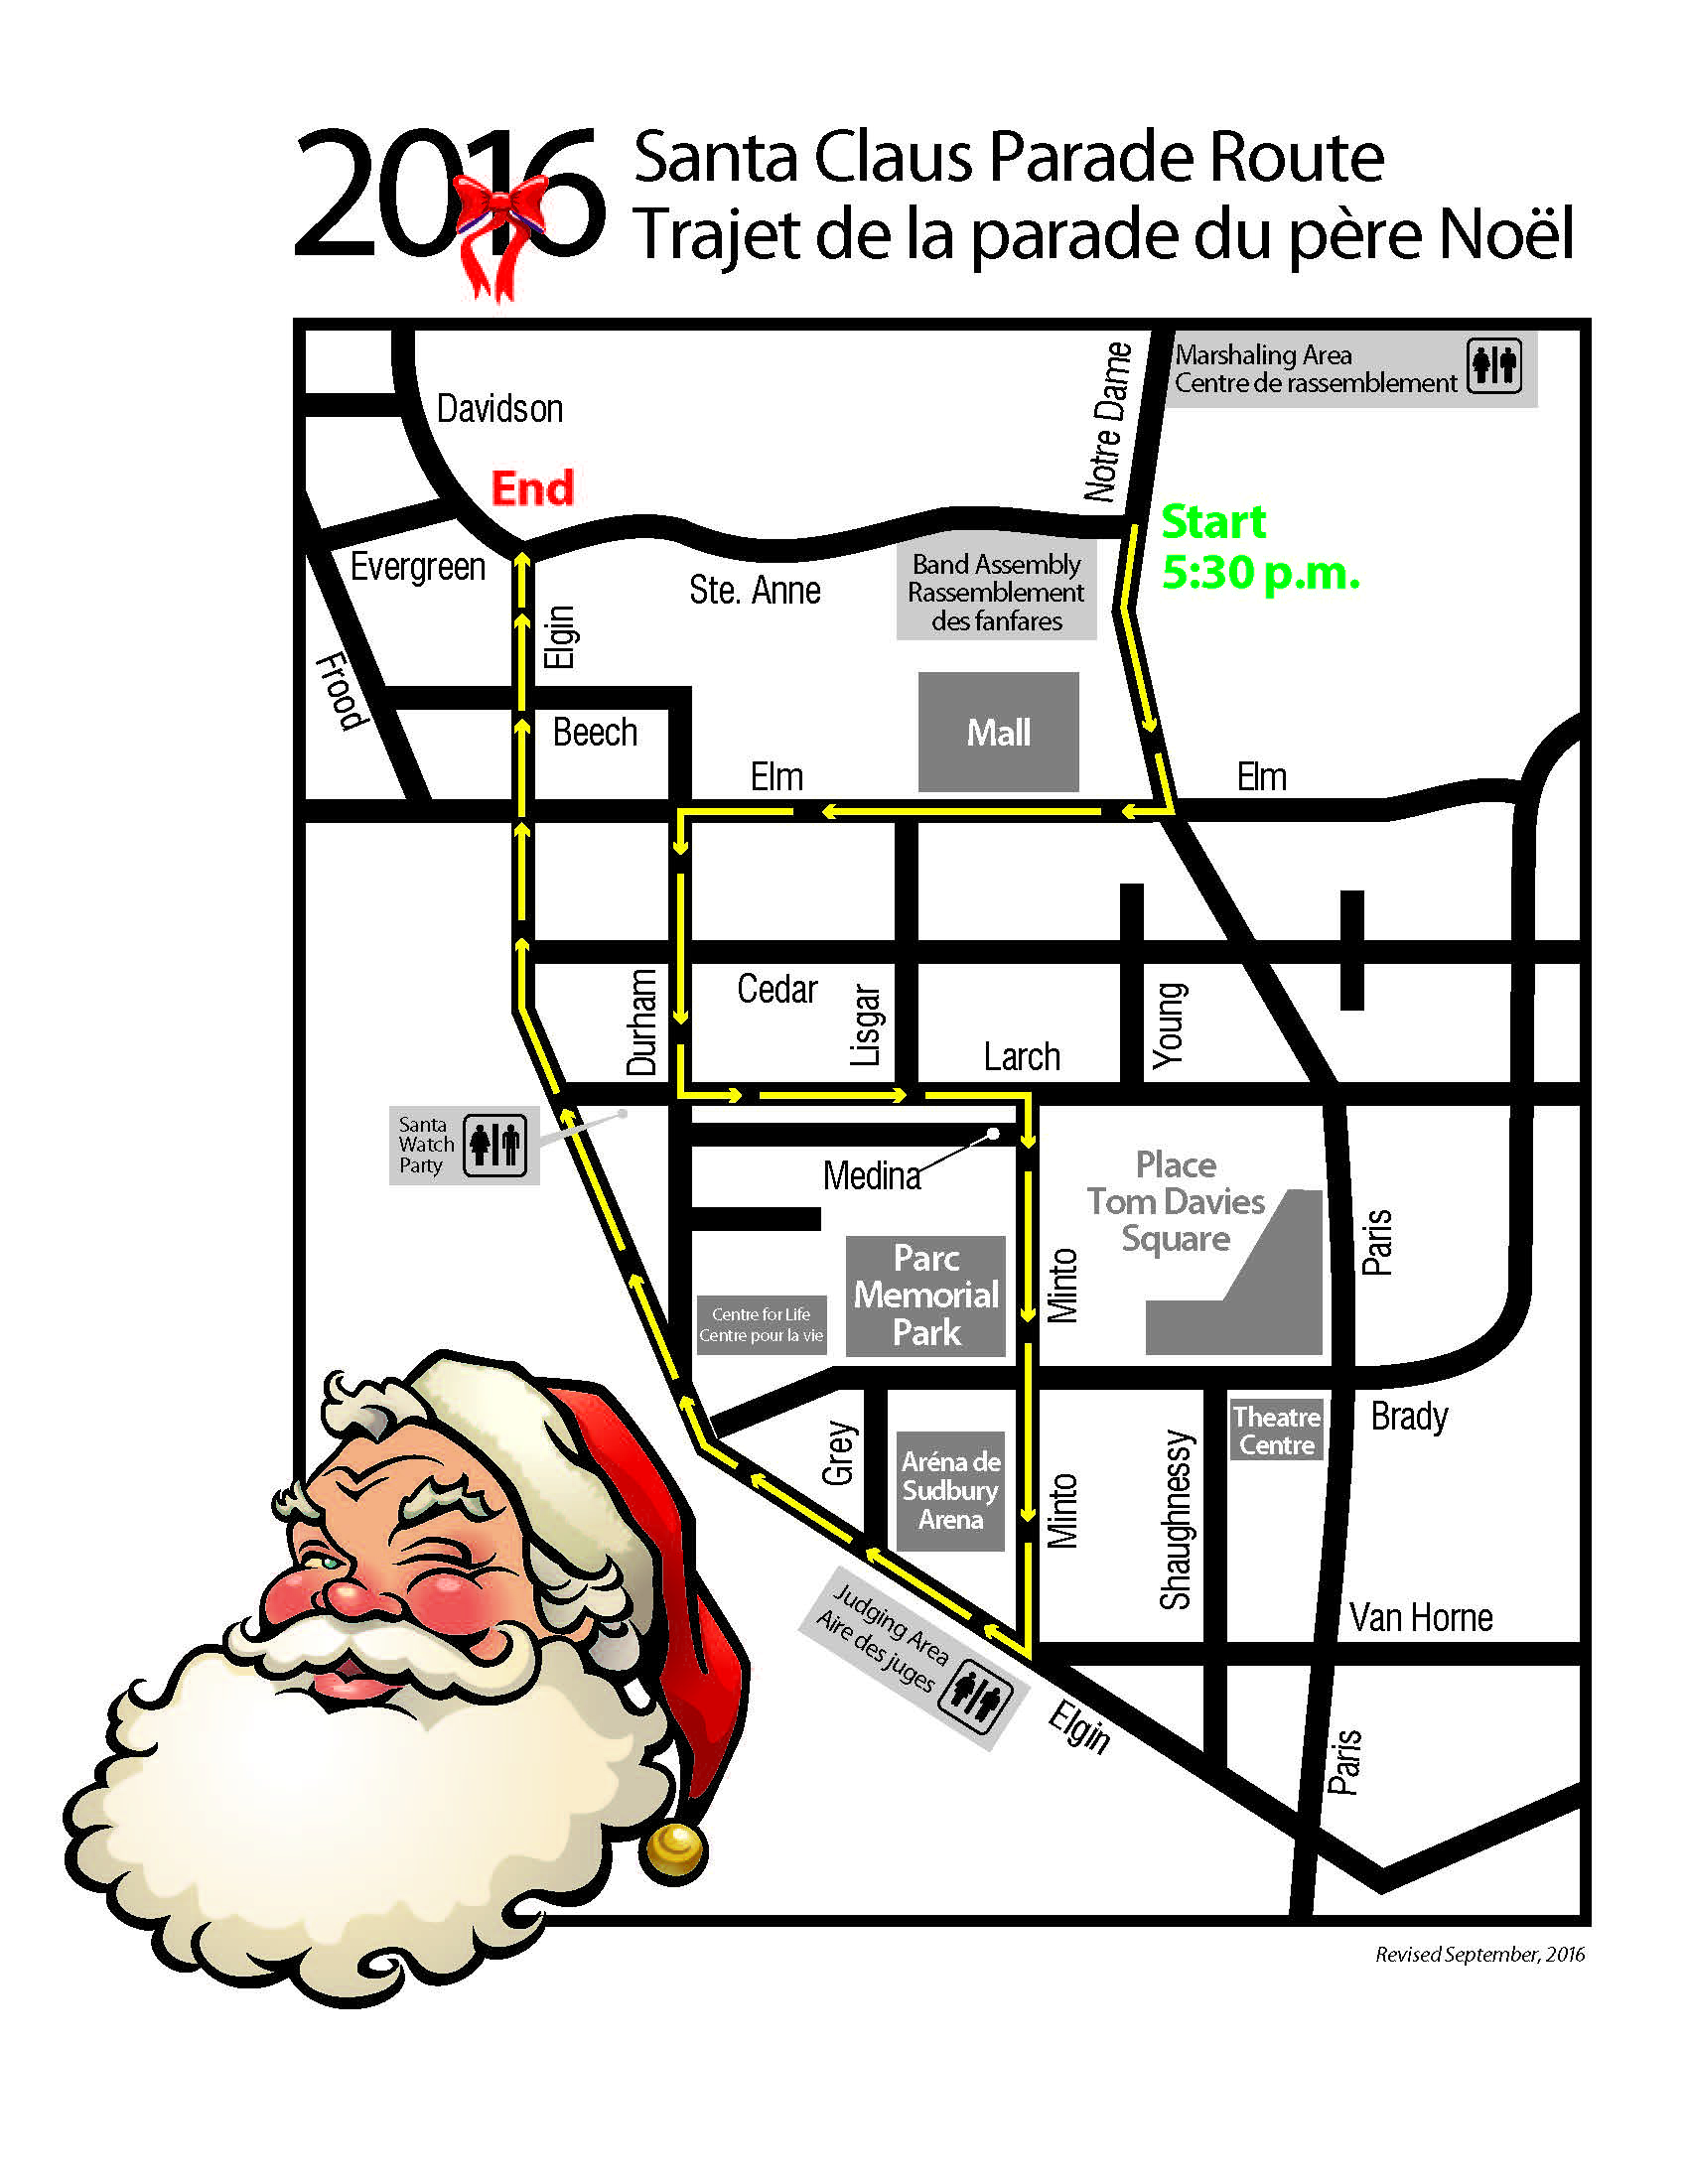 Here’s your printable route map for Saturday’s Santa Claus Parade